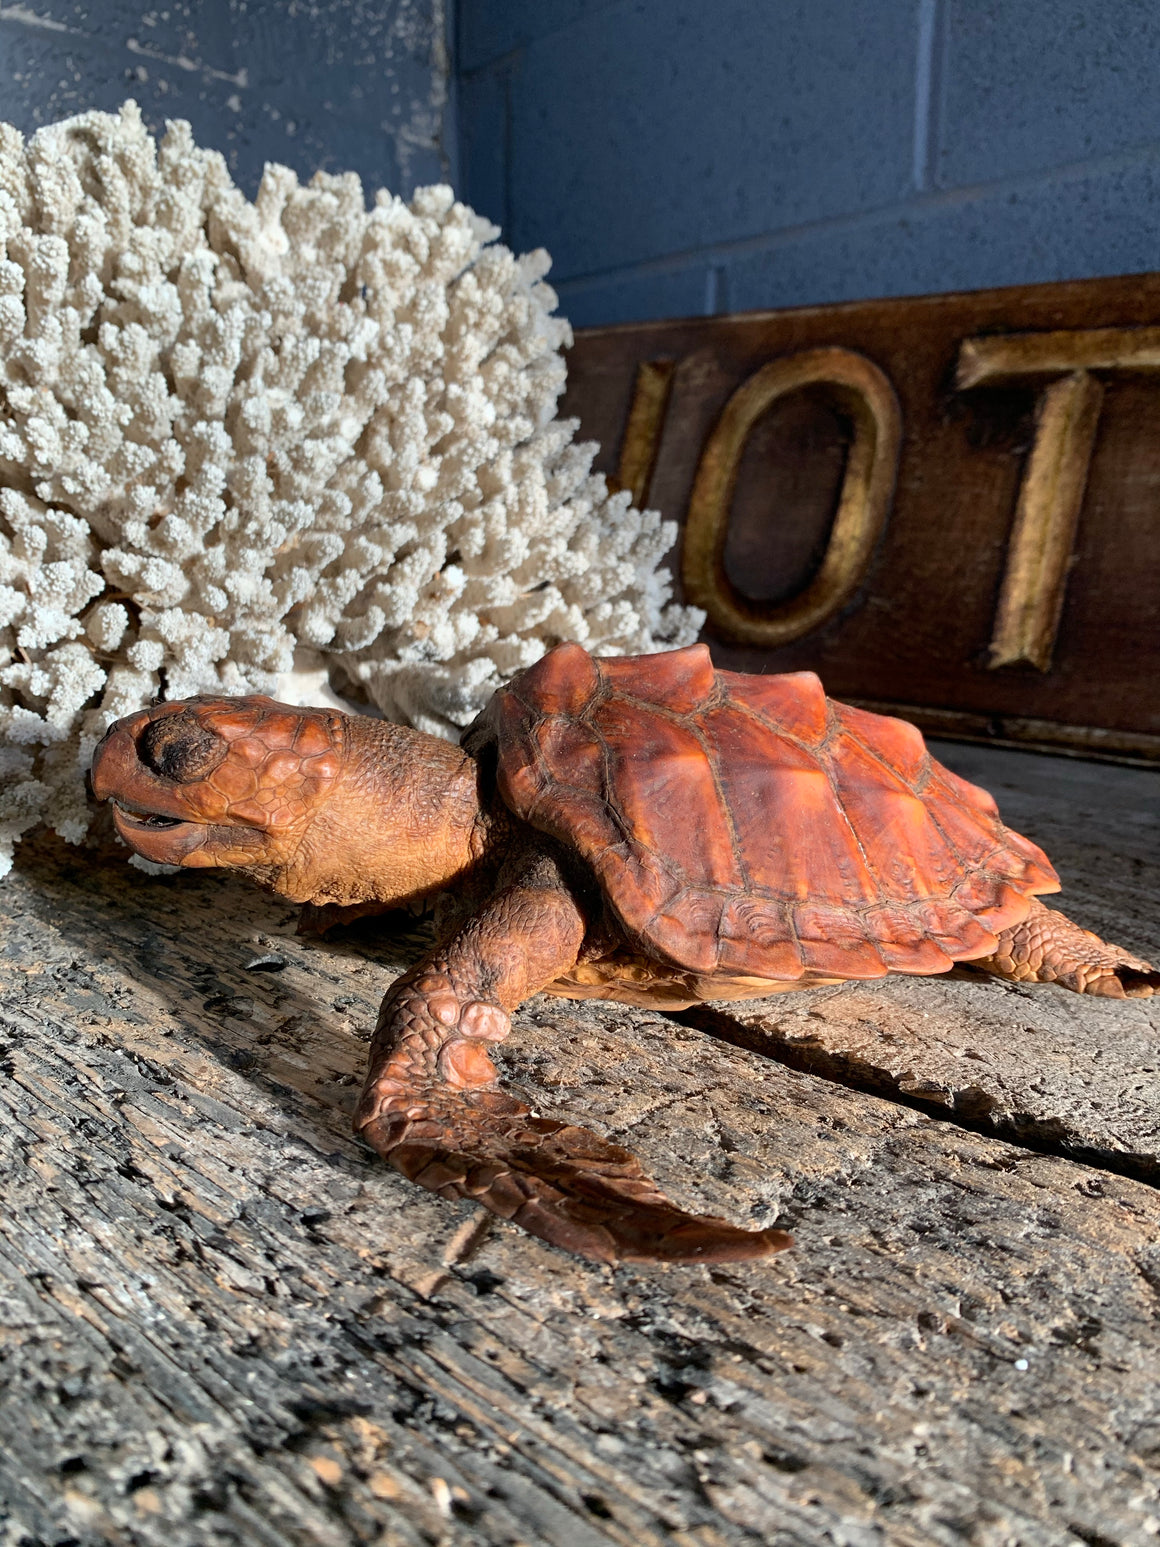 An antique mounted taxidermy turtle specimen